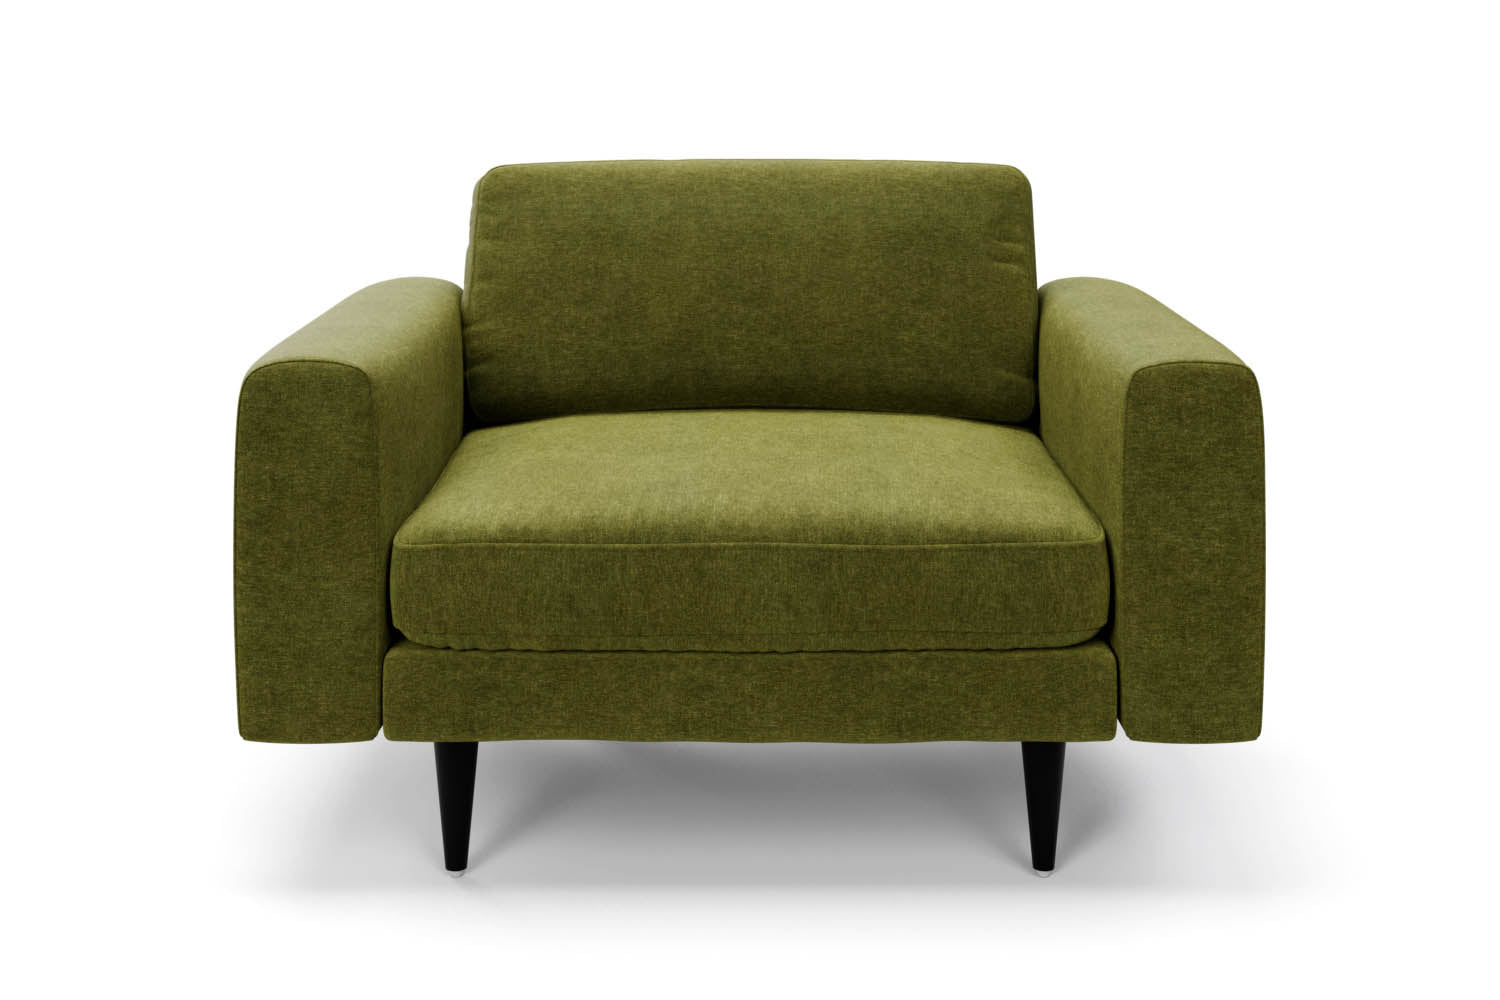  The Big Chill Snuggler in Moss Chenille with black legs front variant_40886286942256